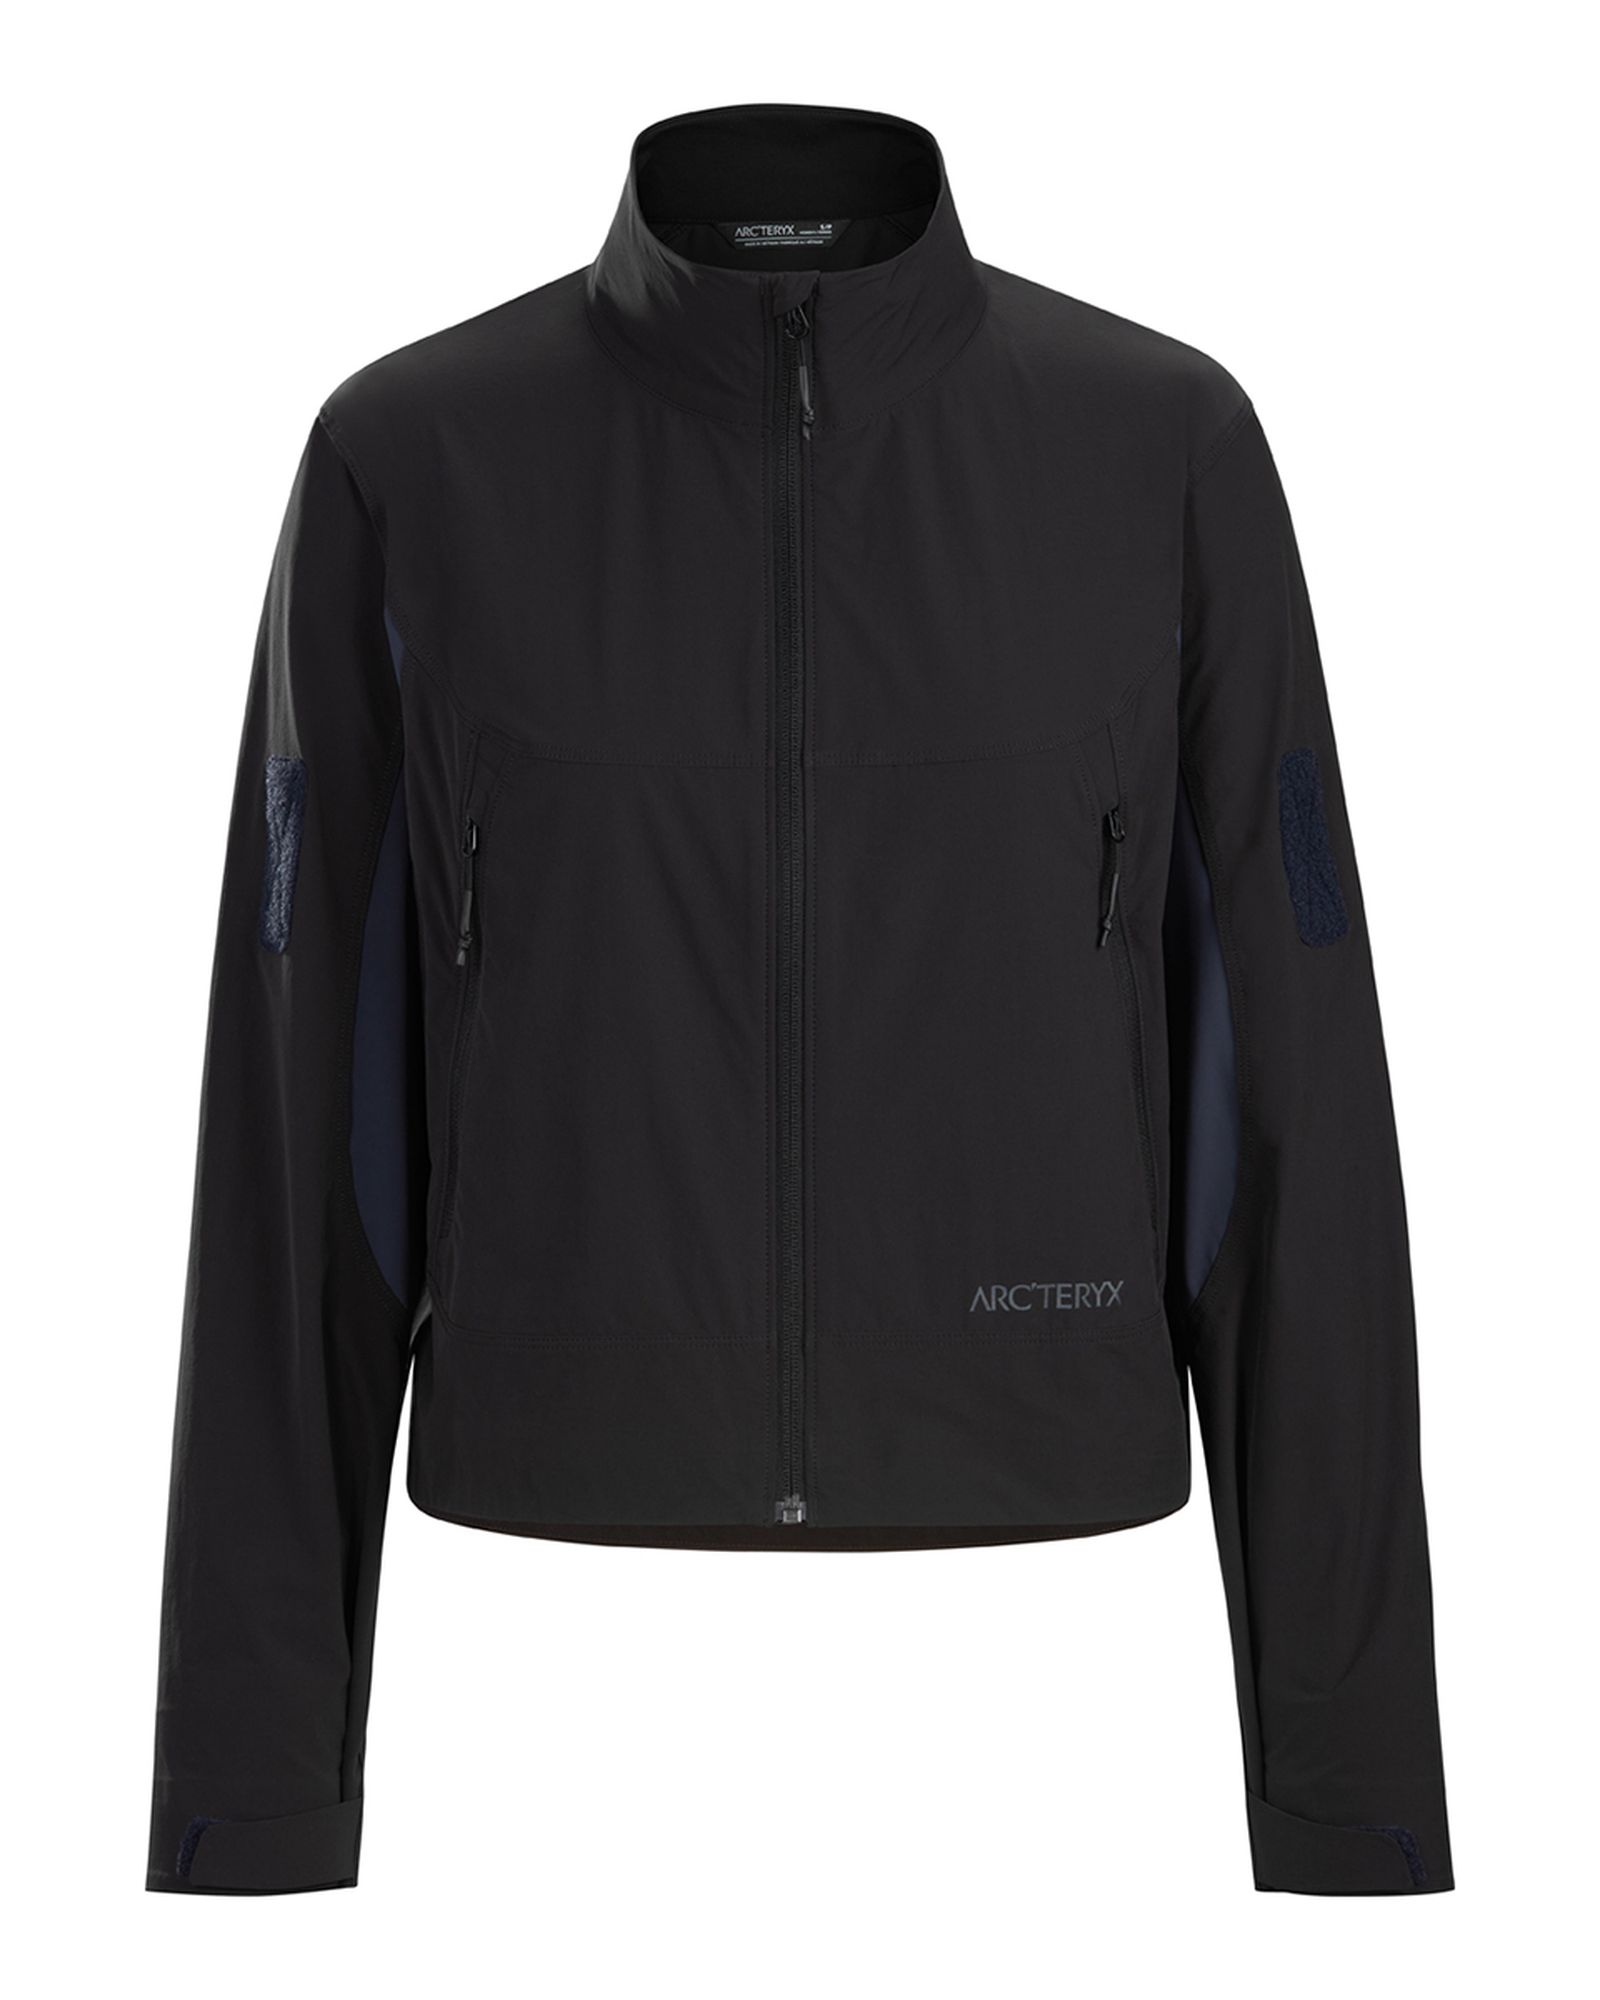 arcteryx-system-a-collection-three-ss22-release (11)